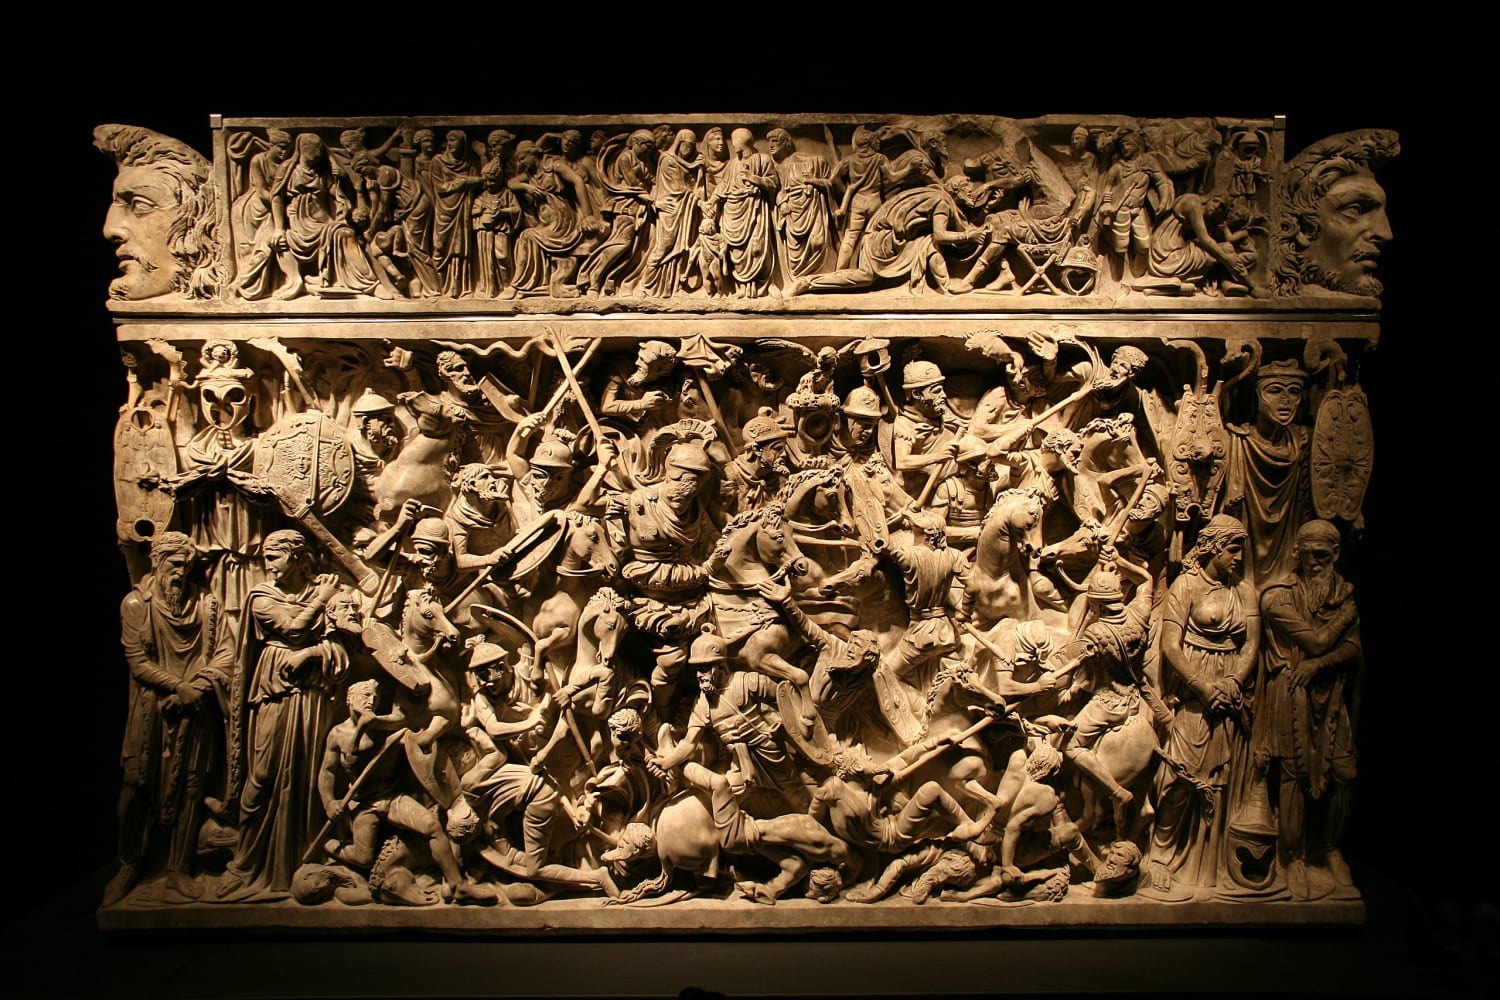 The Portonaccio battle sarcophagus. One of a group of about 25 late Roman battle sarcophagi, this one shows Roman victories over different germanic tribes and dates to between 190 and 200. It was used for the burial of a Roman general involved in the campaigns of Marcus Aurelius.